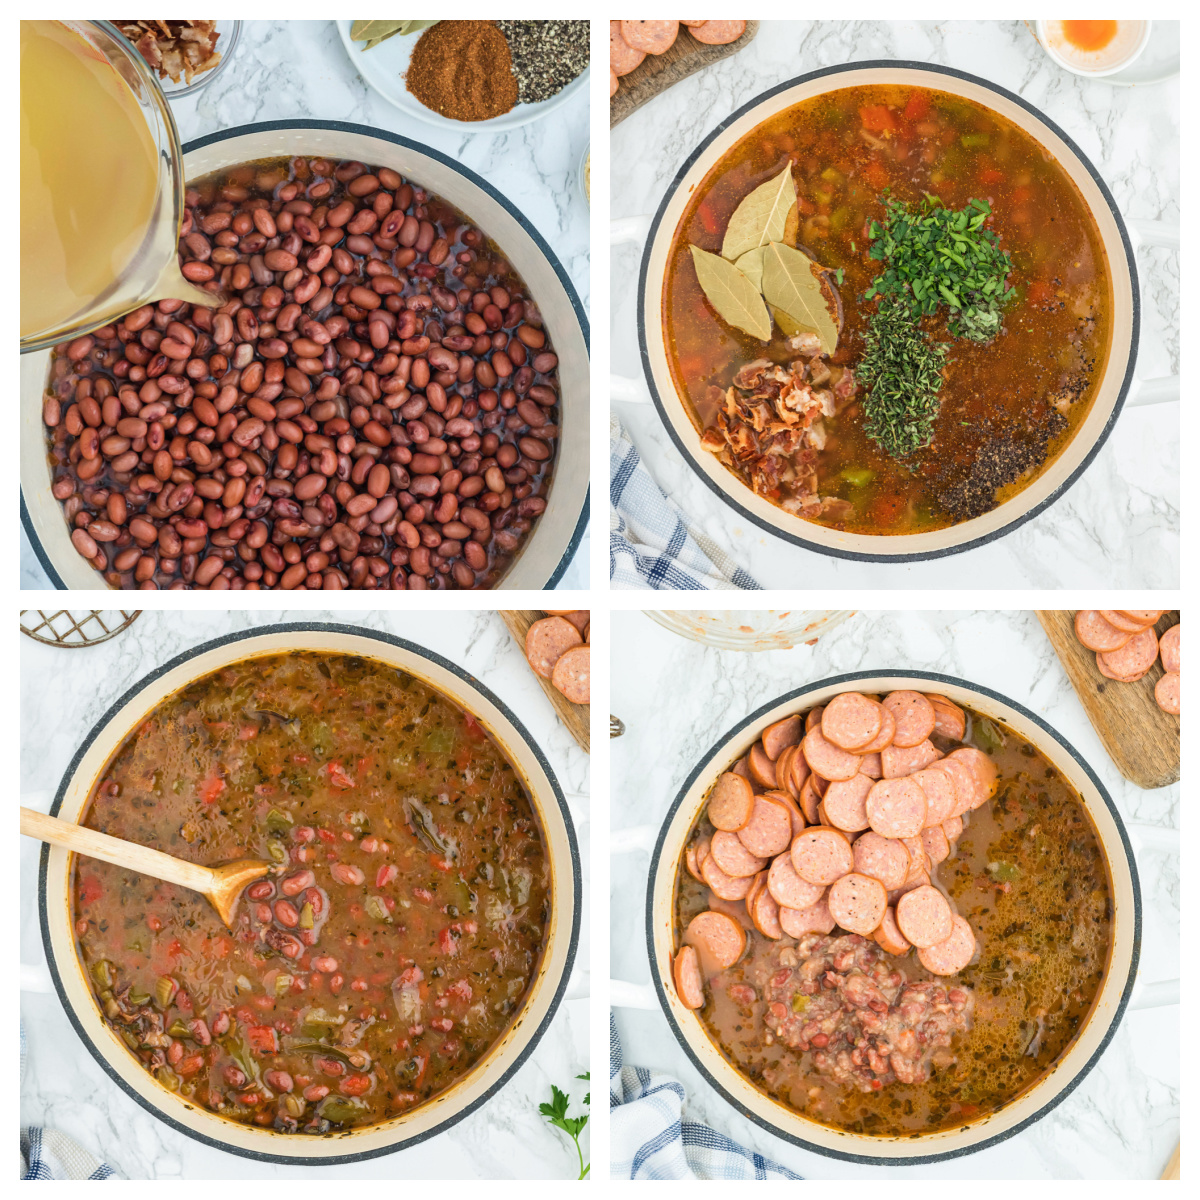 https://www.savoryexperiments.com/wp-content/uploads/2022/04/How-to-make-authentic-red-beans-and-rice-2.jpg